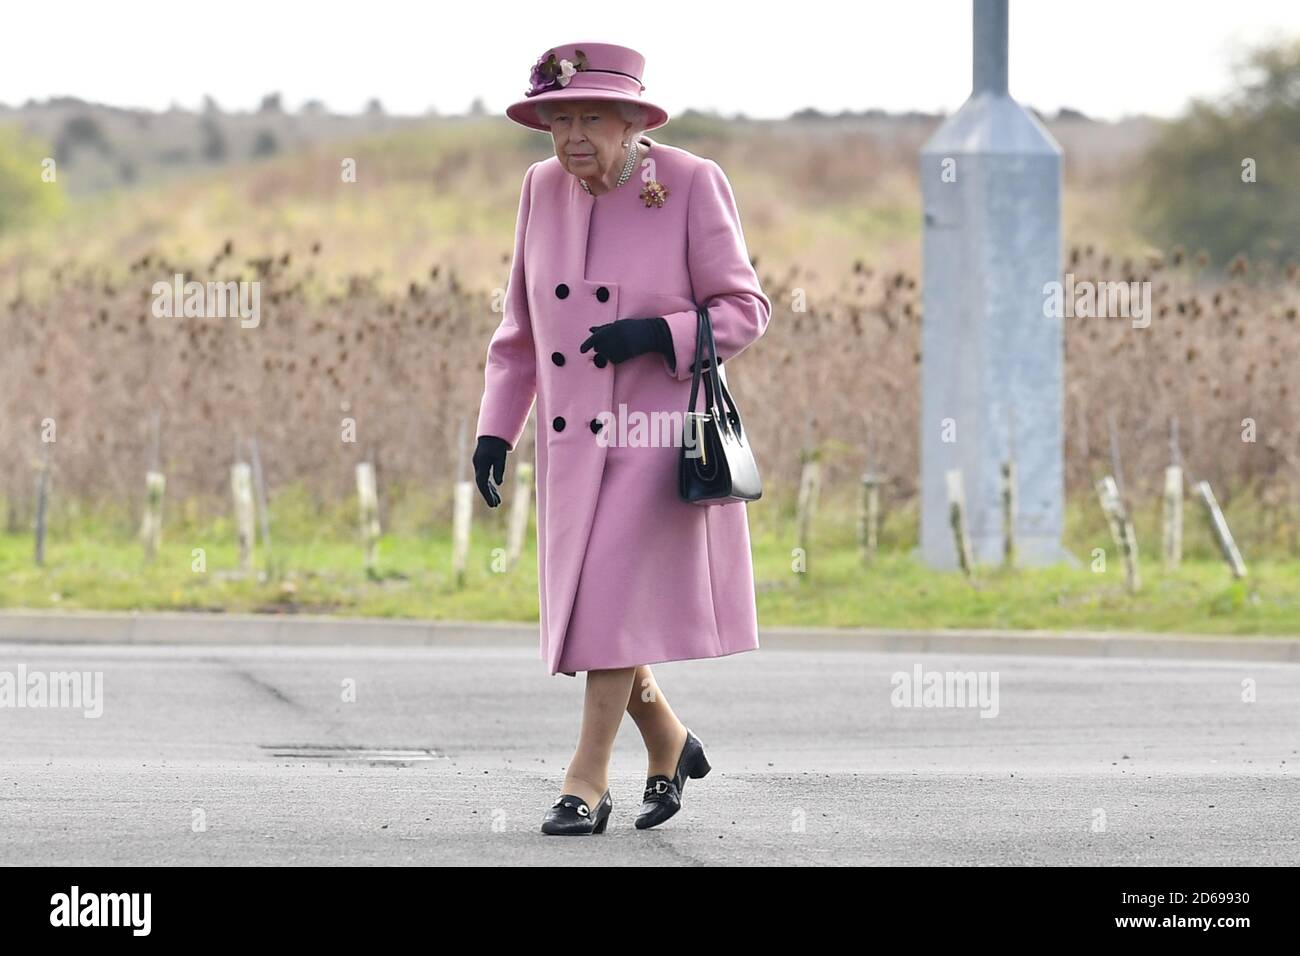 Britain's Queen Elizabeth arrives at the Energetics Analysis Centre during a visit to Dstl at Porton Science Park near Salisbury, Britain October 15, 2020.  Ben Stansall/Pool via REUTERS Stock Photo